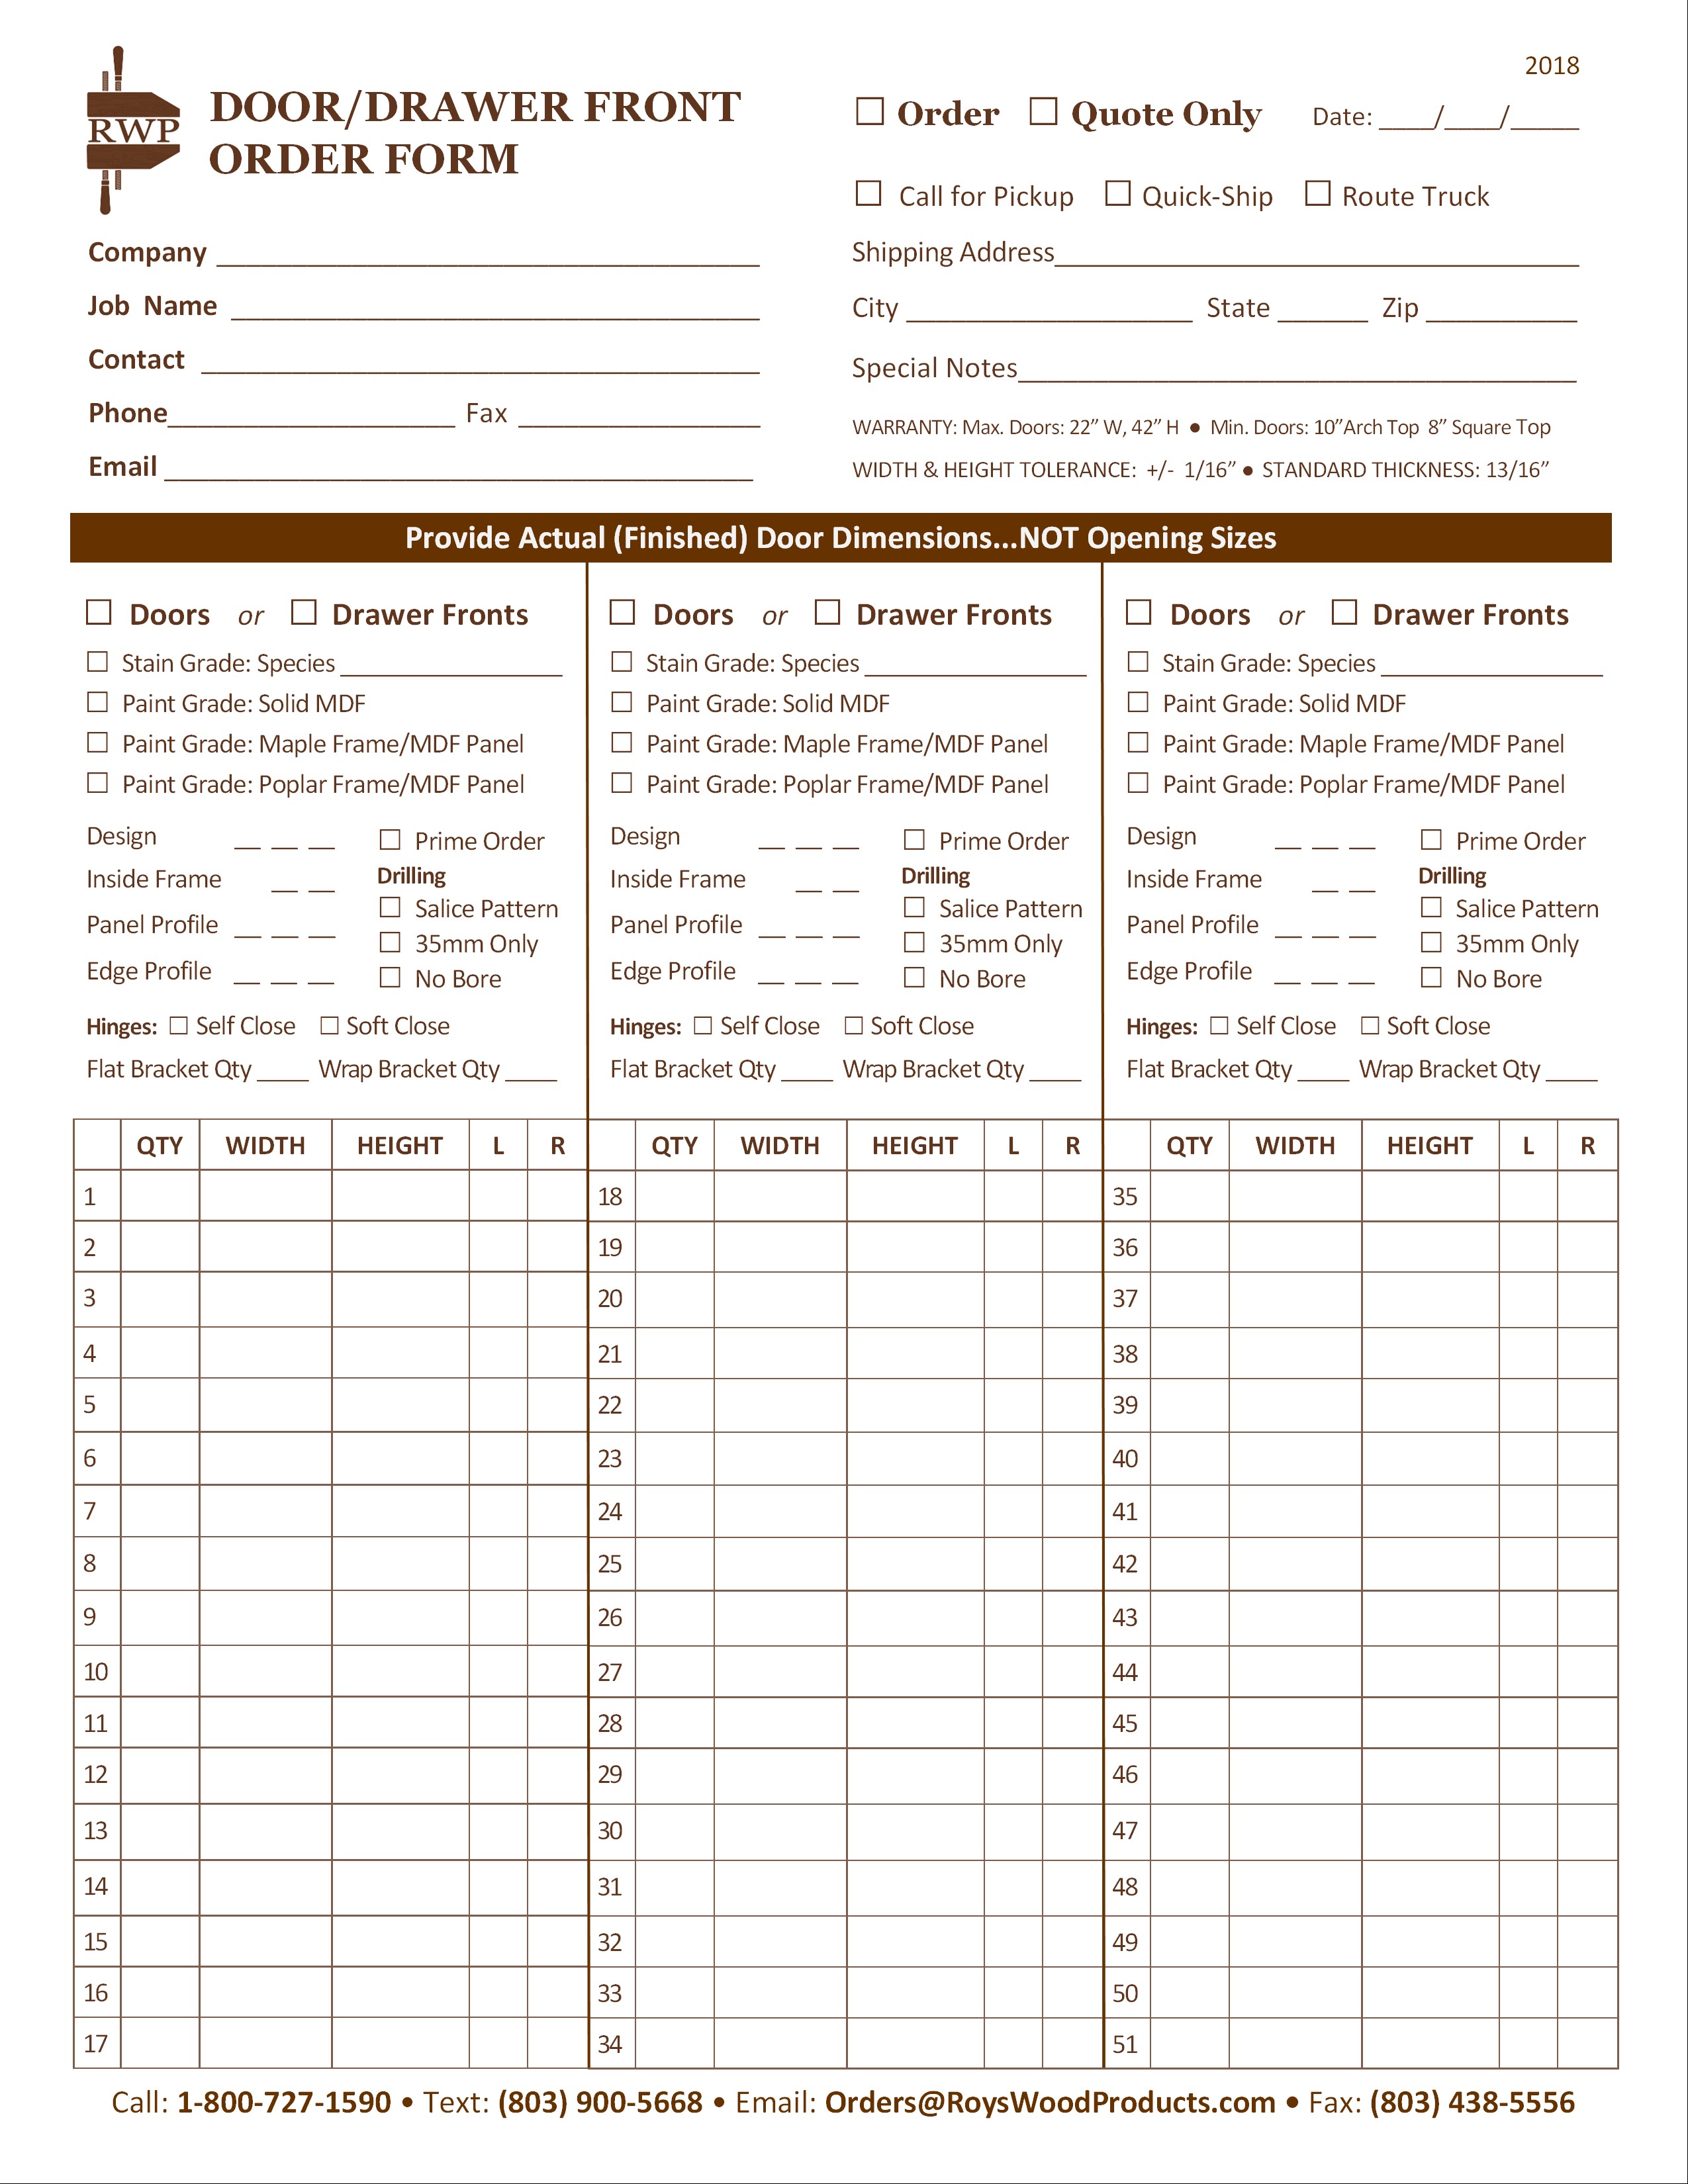 Door Drawer Front Order Form Roy S Wood Products